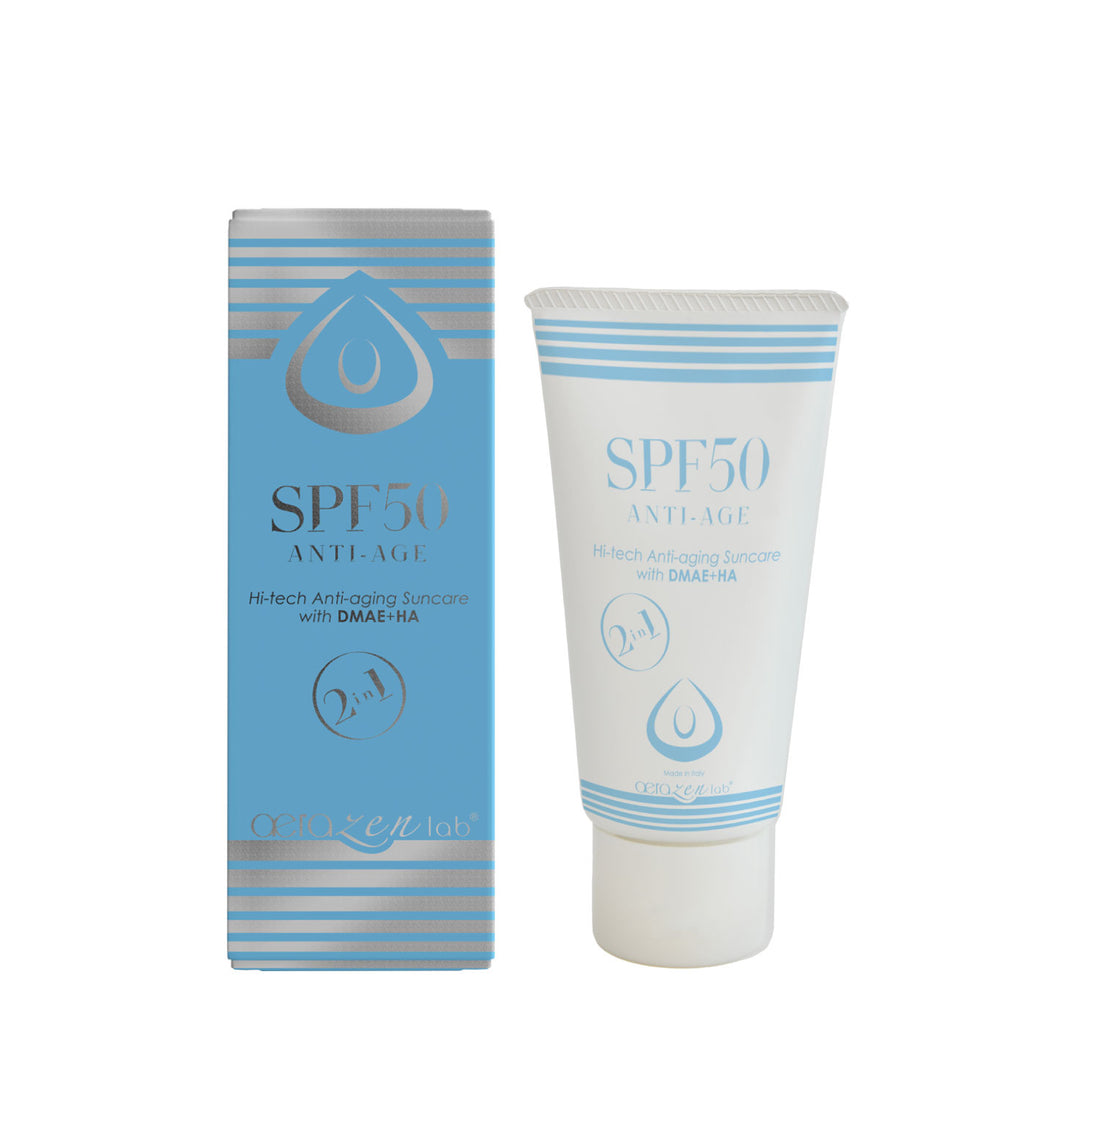 SPF 50 - Anti-Age Hi-Tech - High Protection from Sun Rays with DMAE + HA - Aerazen Lab.